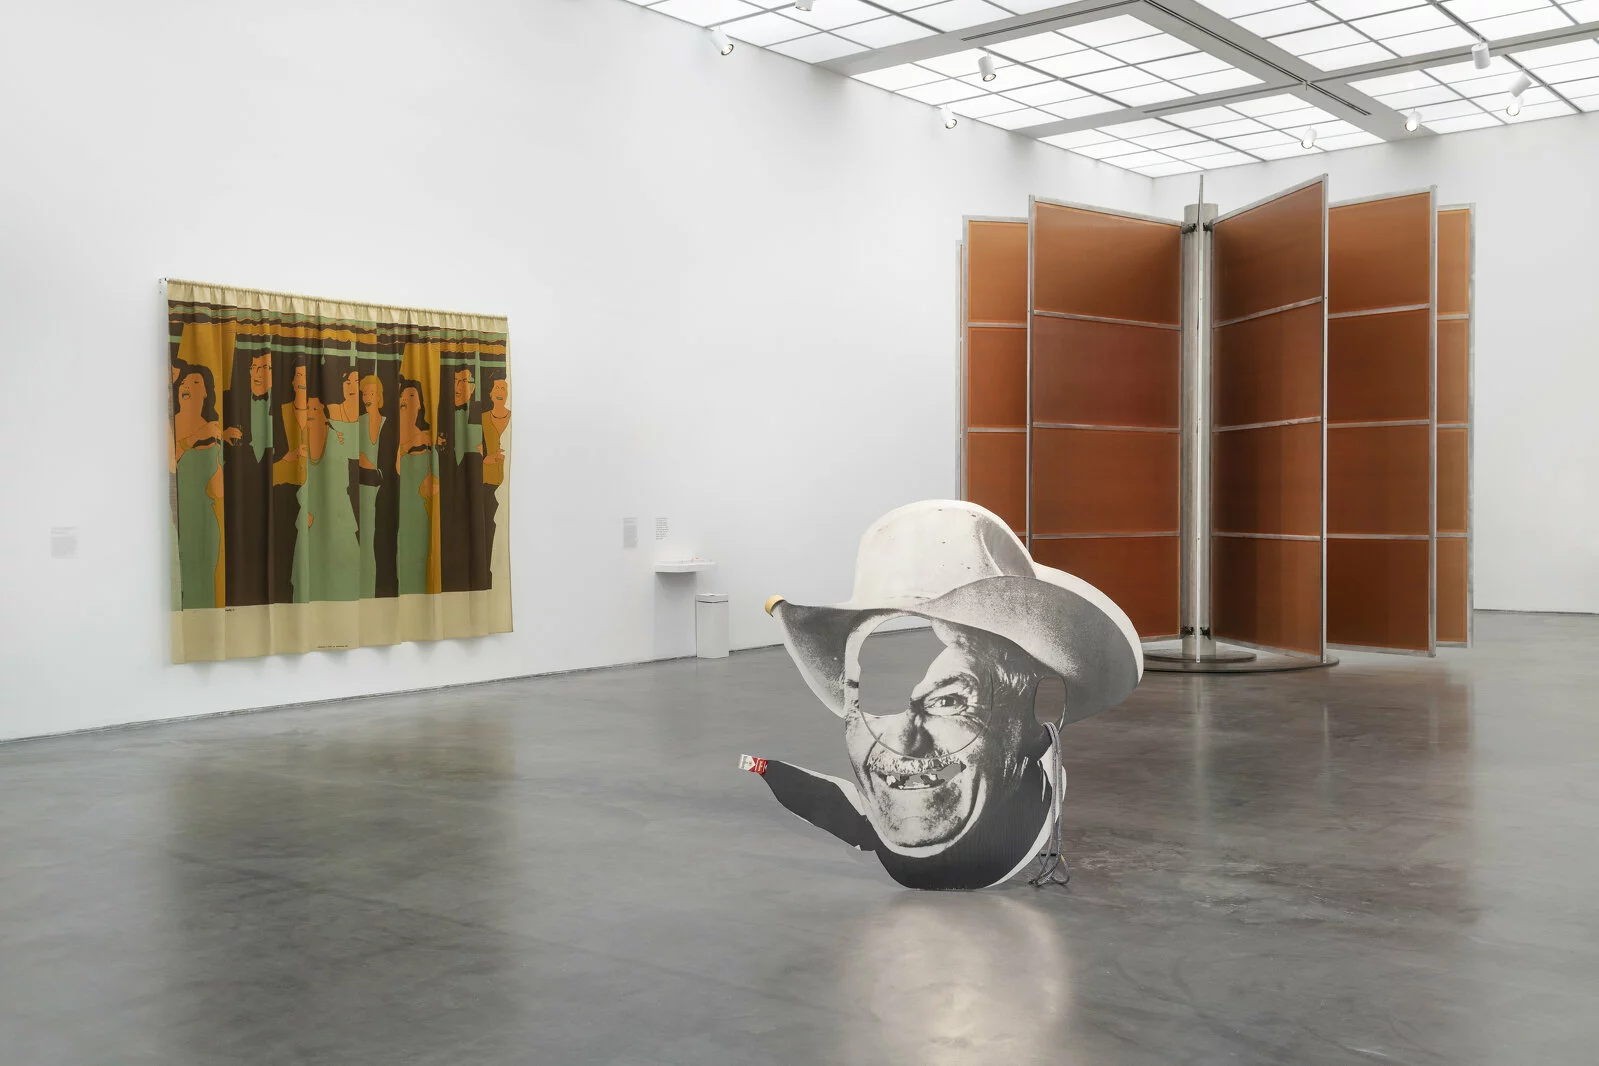 White gallery space with three artworks visible. One is hung on the wall and two are installations.